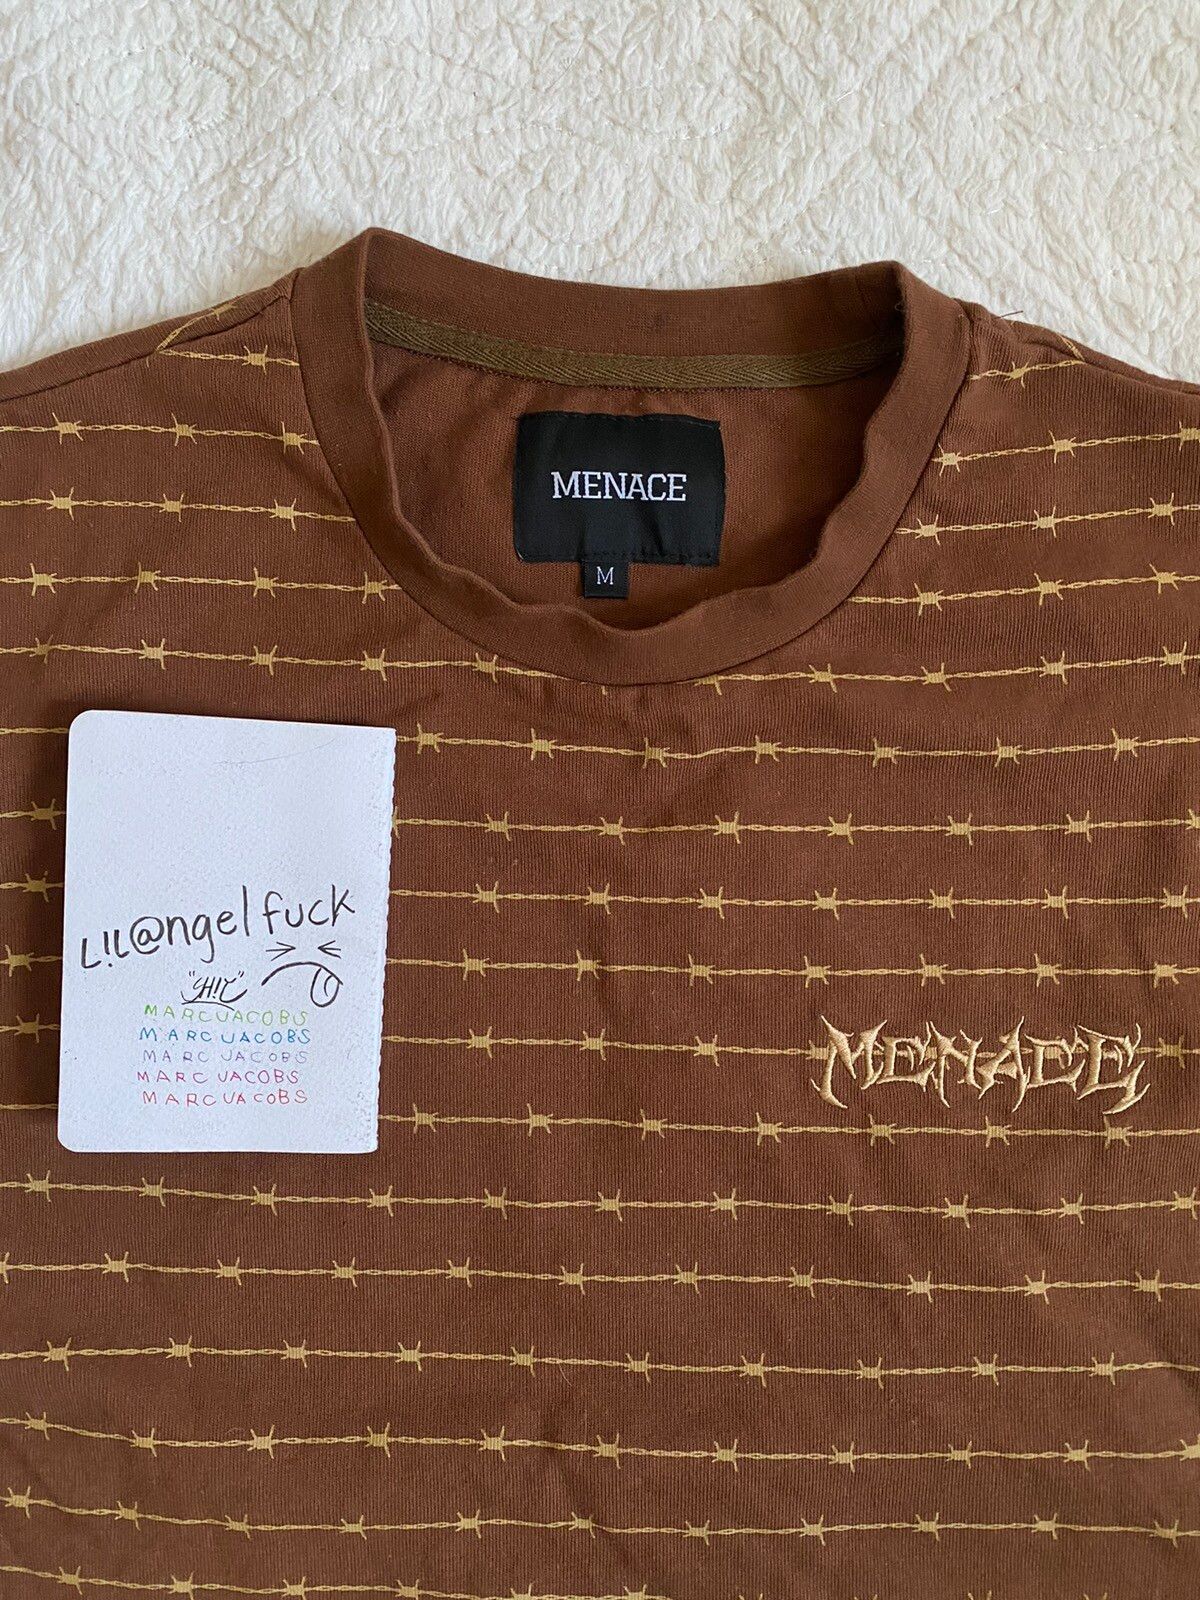 Menace Menace All Over Barbed Wire Tee Size US M / EU 48-50 / 2 - 2 Preview